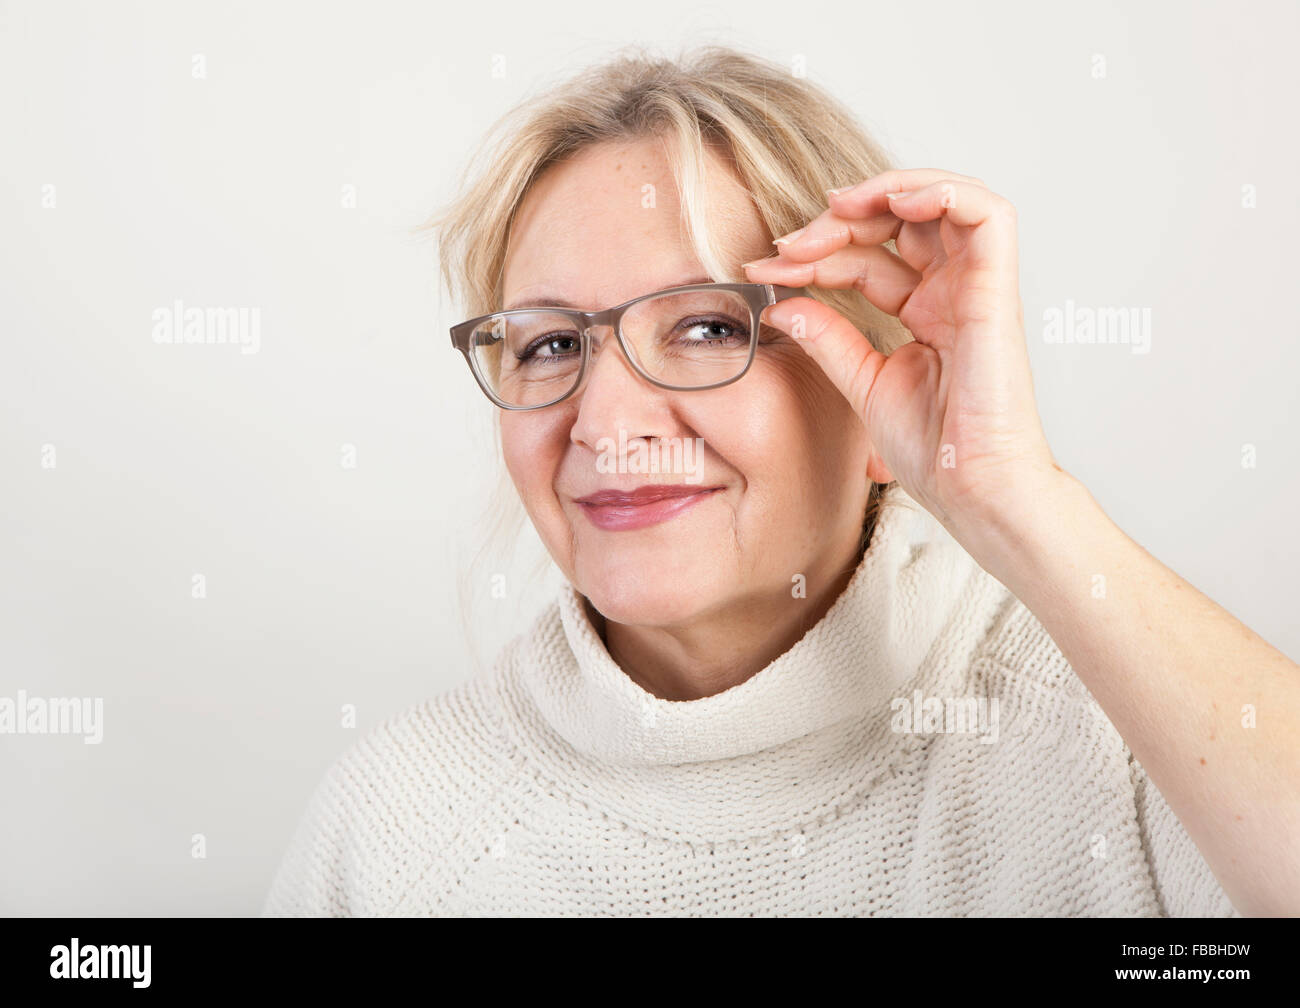 Blonde Boy with Glasses Portrait - wide 7